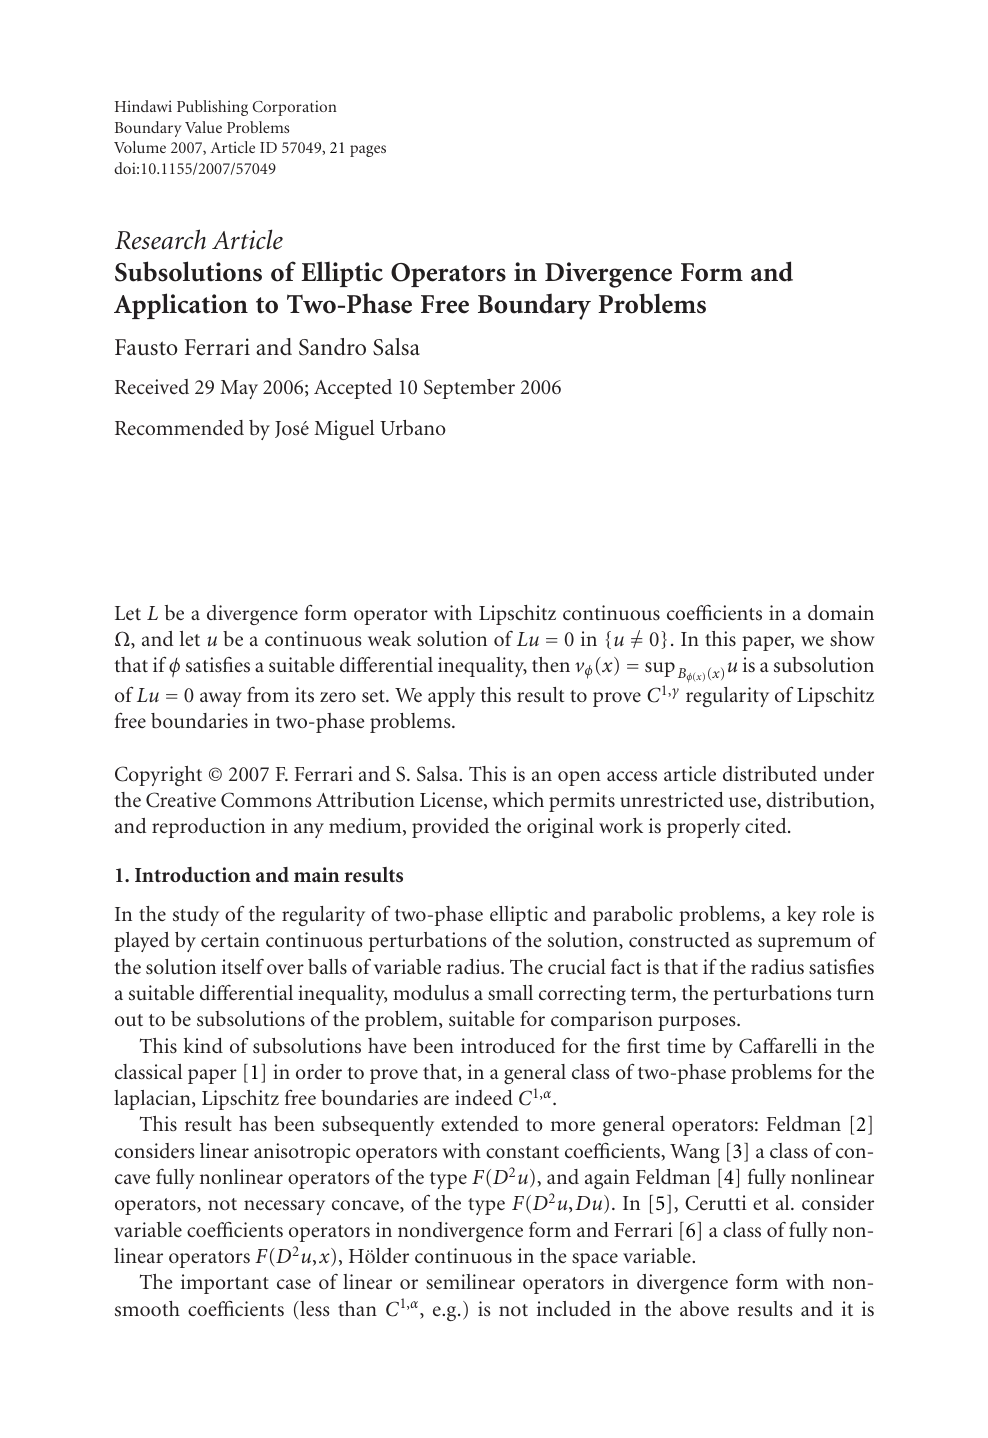 Subsolutions Of Elliptic Operators In Divergence Form And Application To Two Phase Free Boundary Problems Topic Of Research Paper In Mathematics Download Scholarly Article Pdf And Read For Free On Cyberleninka Open